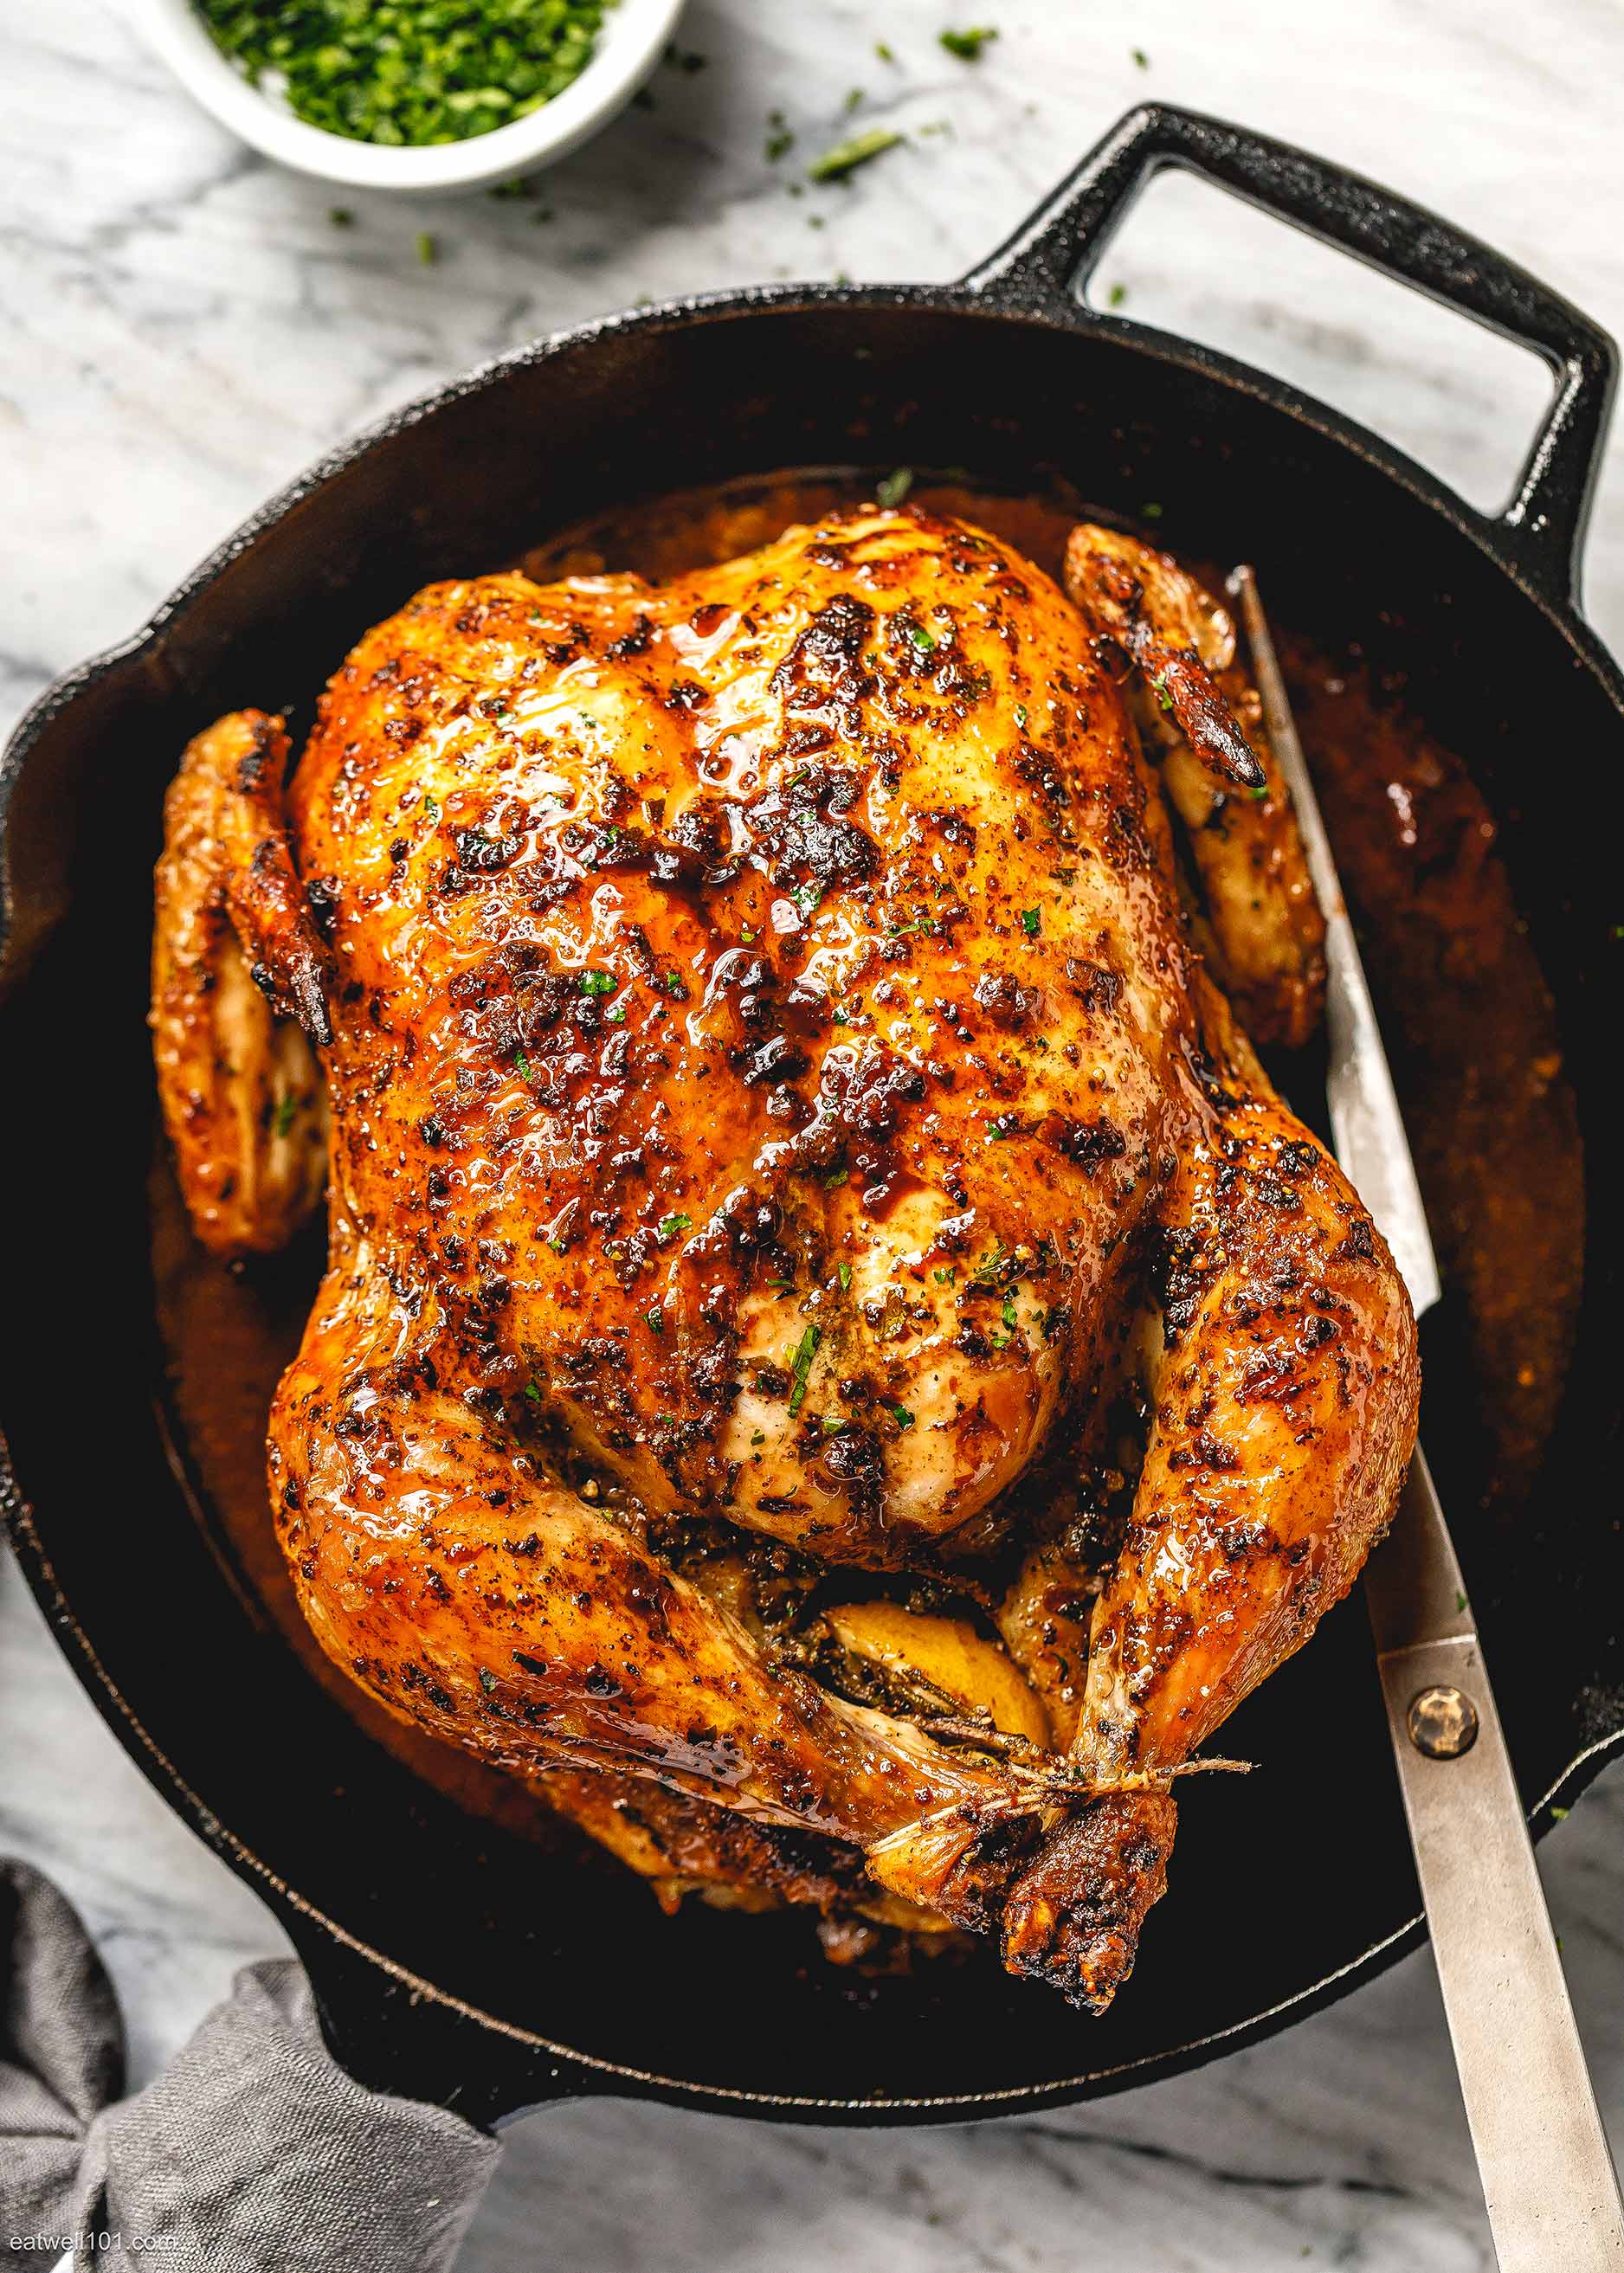 Roasted Chicken Recipe With Garlic Herb Butter Whole Roasted Chicken Recipe — Eatwell101